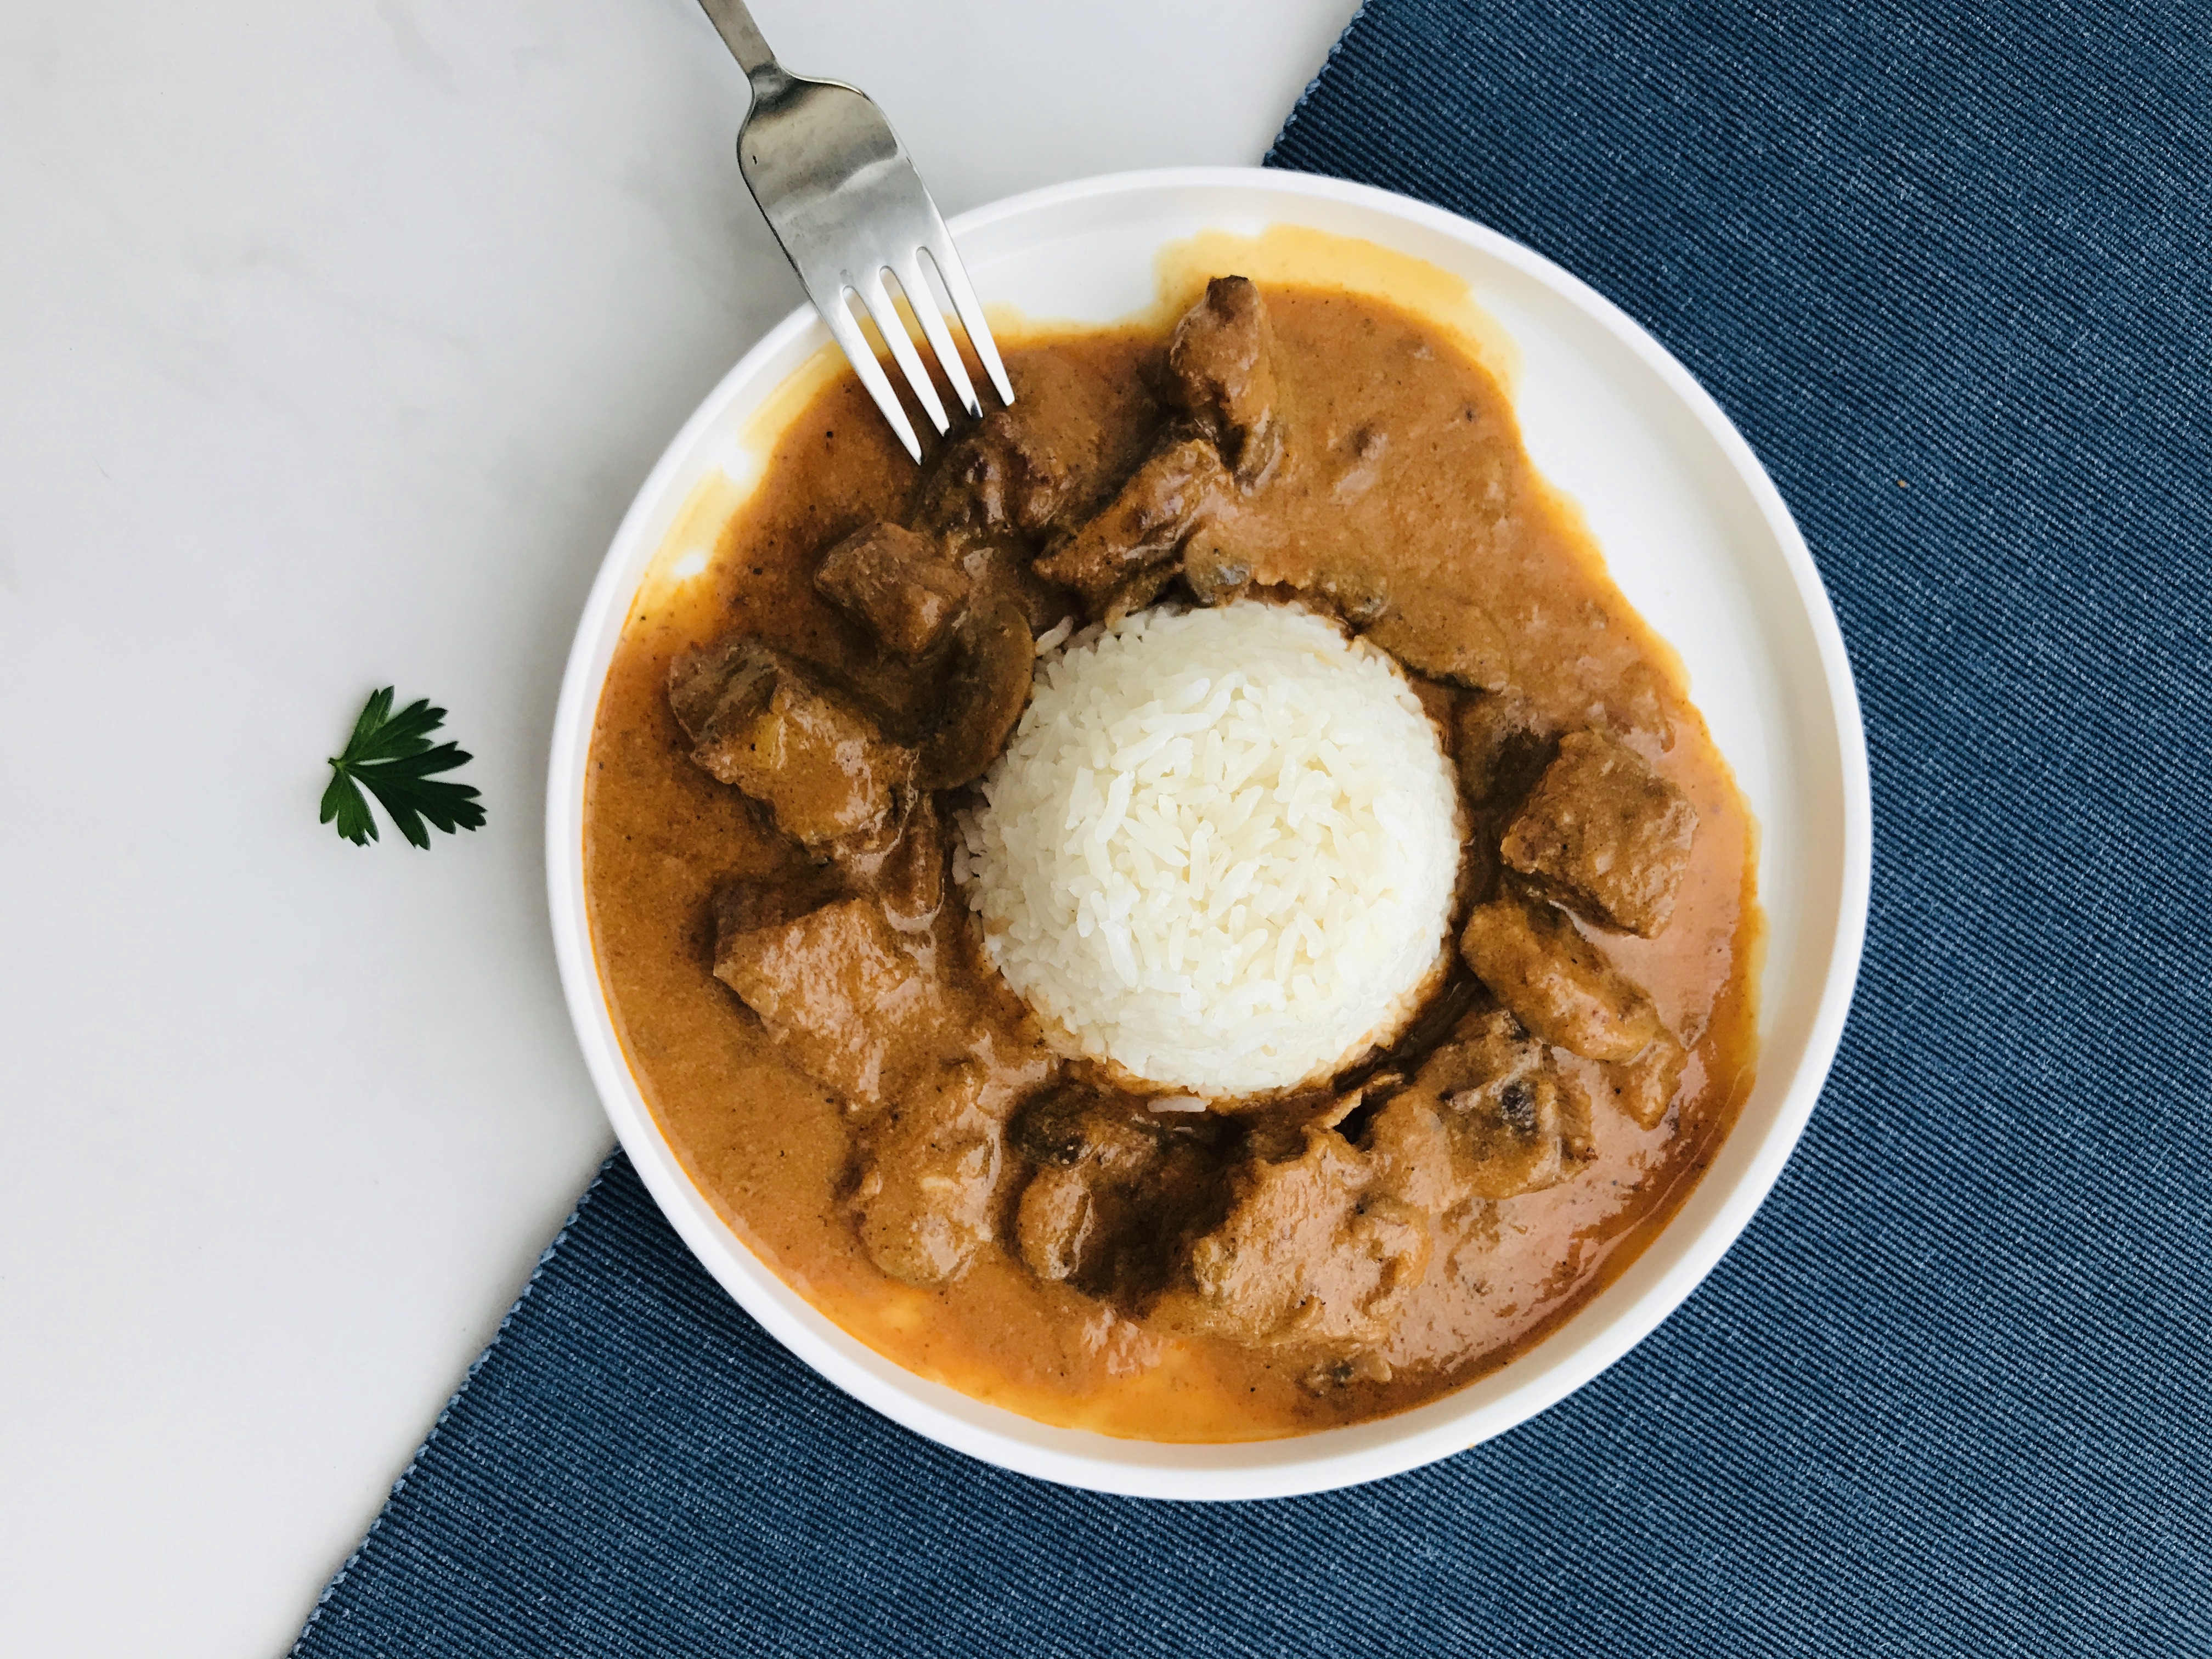 This is our favorite family recipe : Brazilian Stroganoff